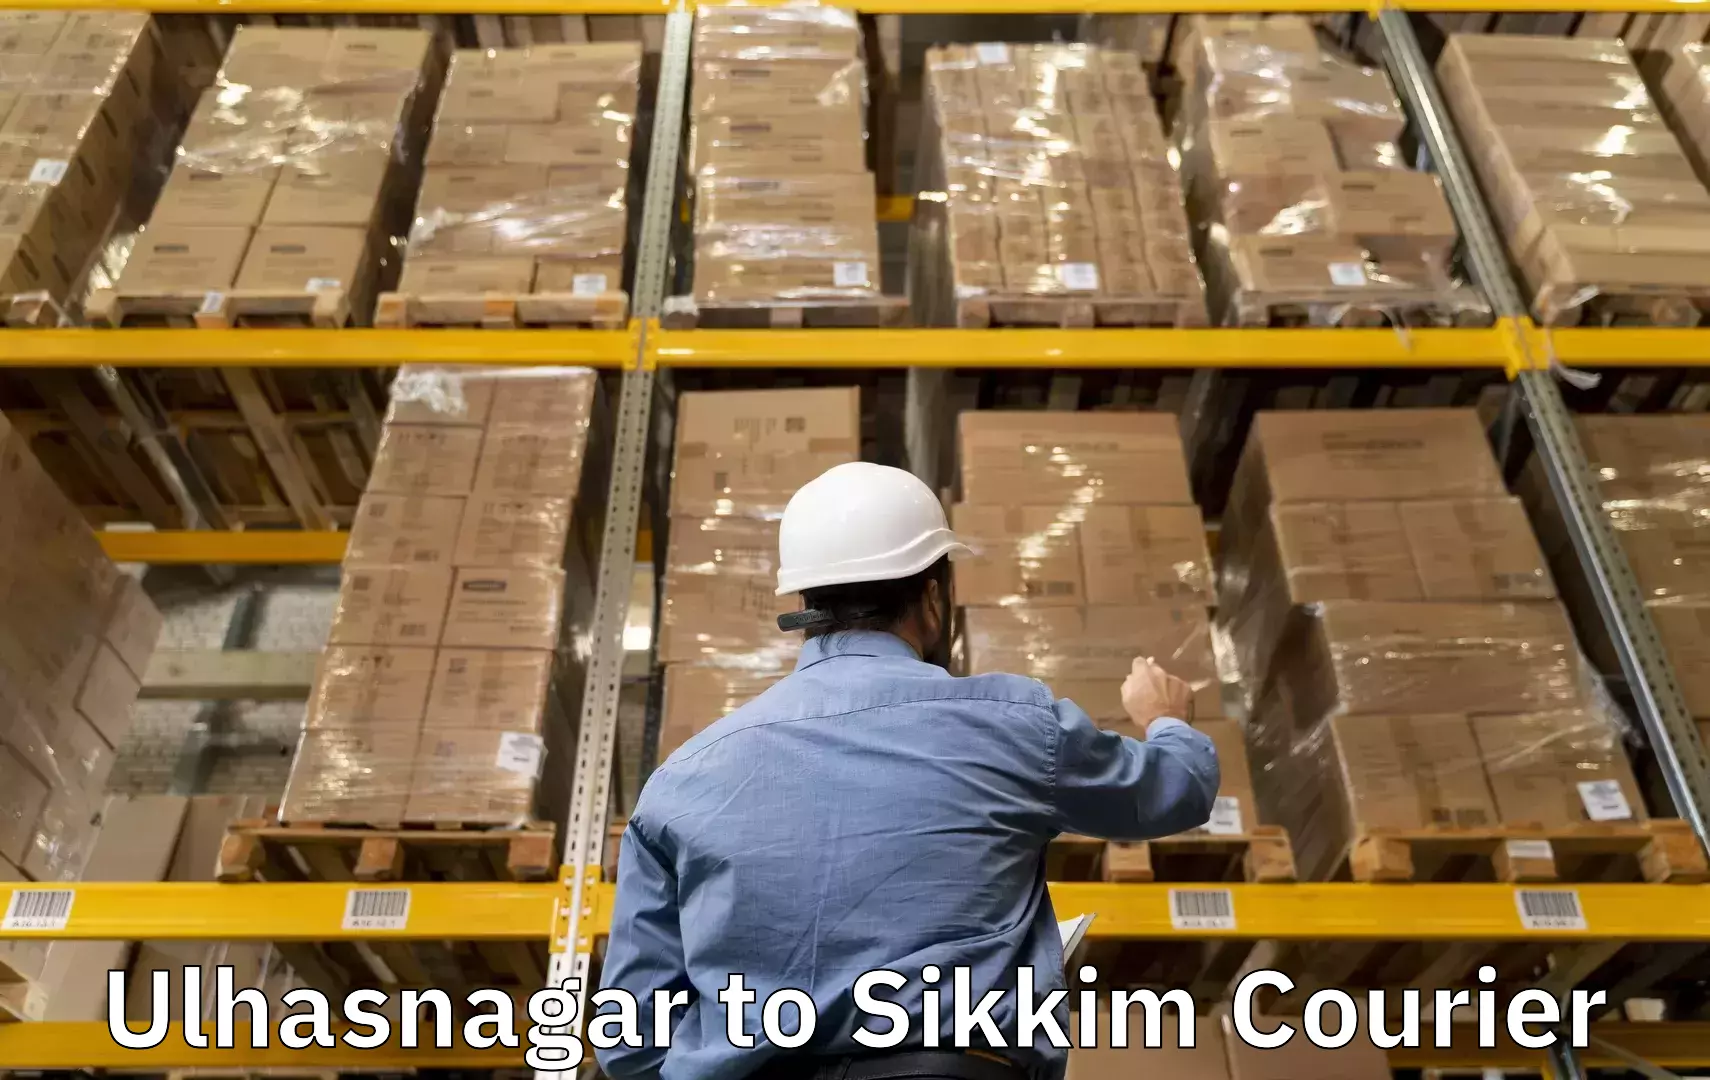 Luggage shipment specialists Ulhasnagar to East Sikkim